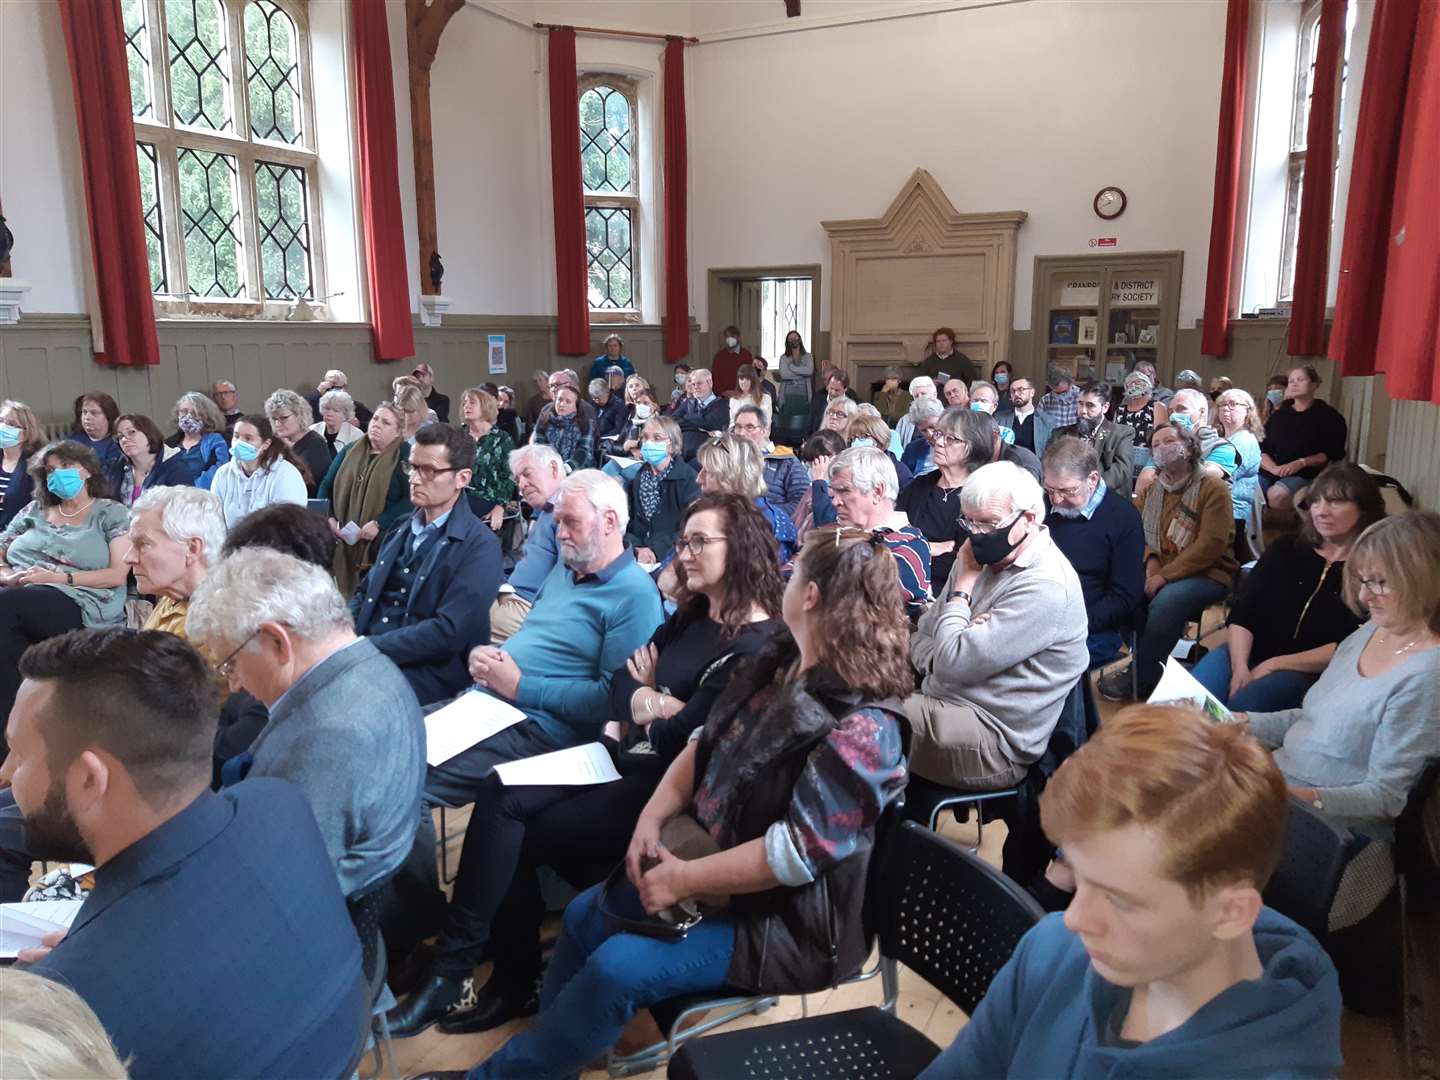 The audience at the Vestry Hall, Cranbrook